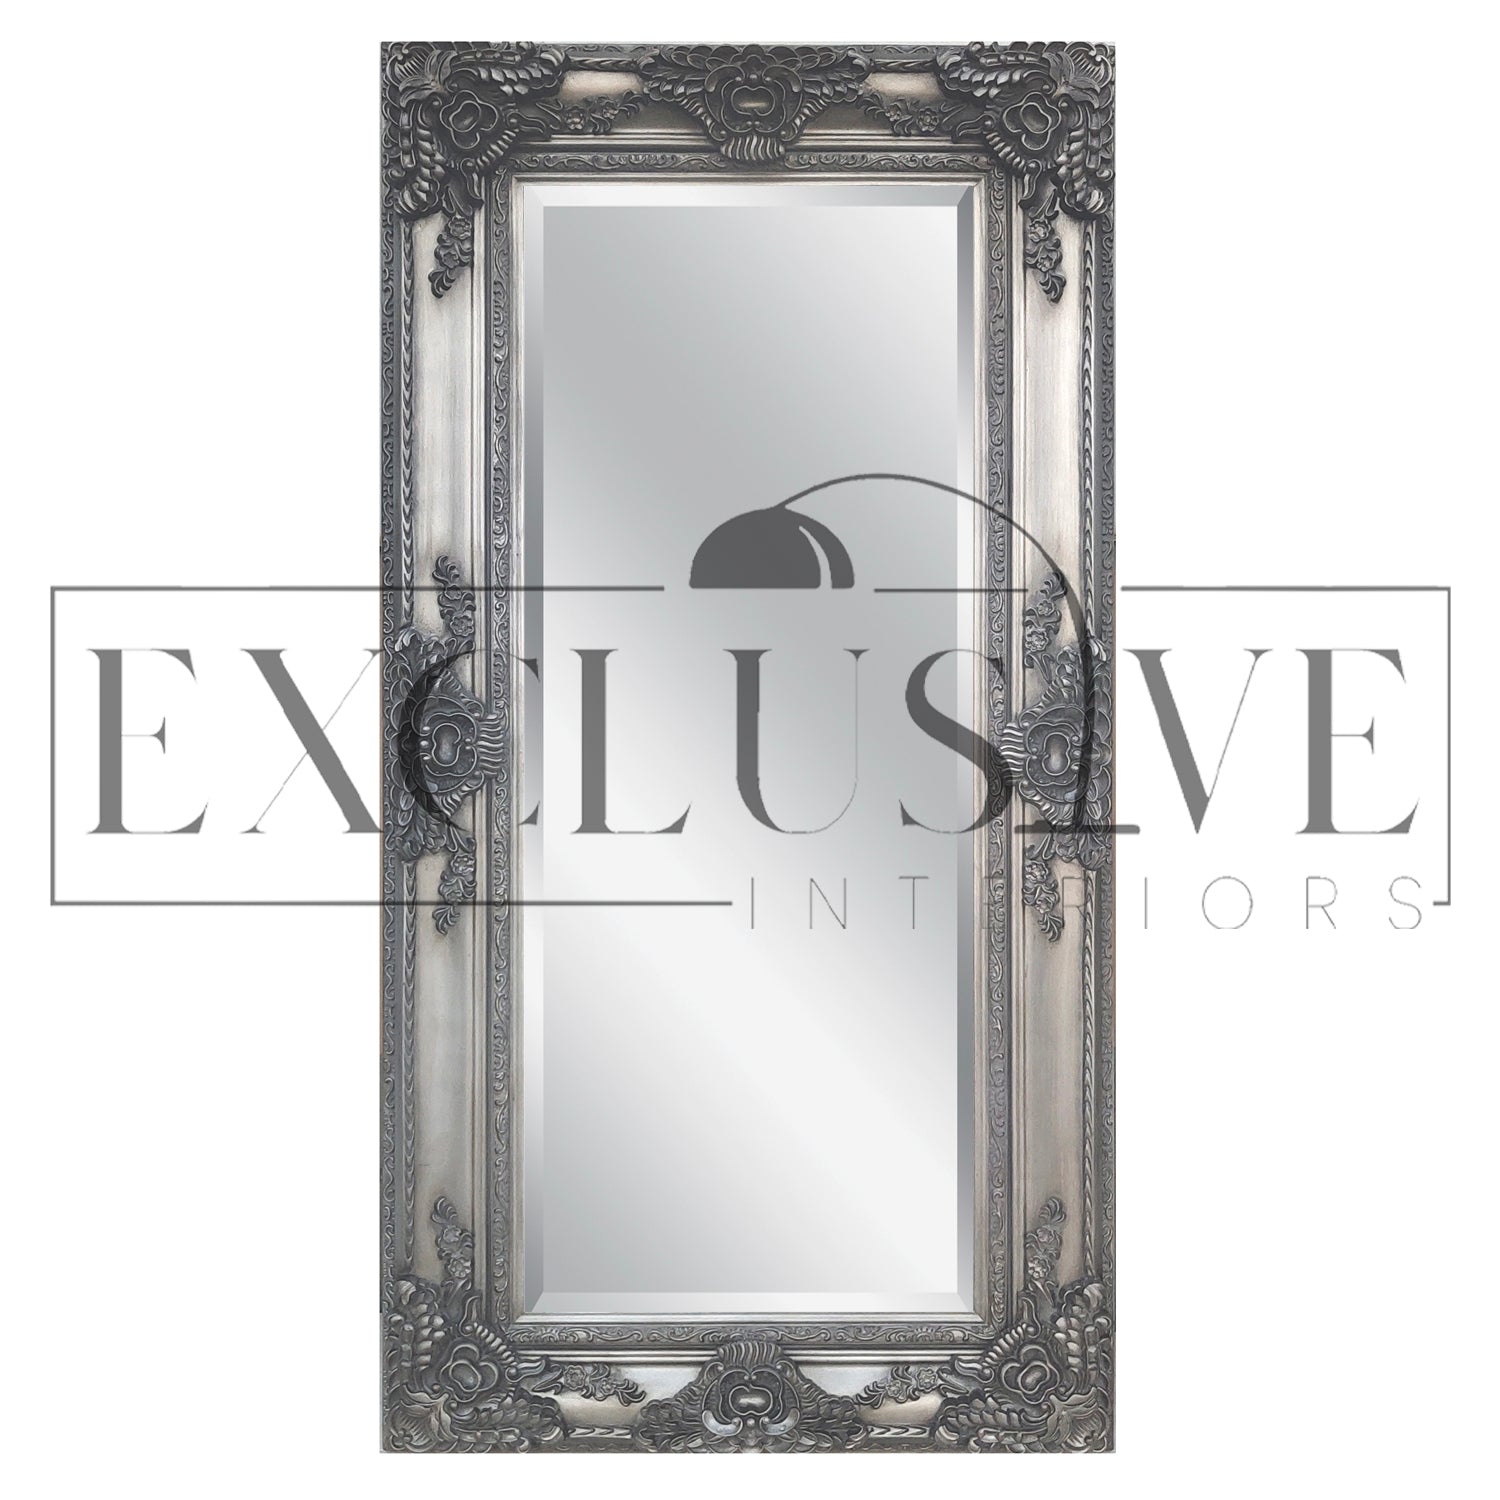 Decorative entryway mirrors, wall mirrors, framed mirror, full-length mirrors, antique contemporary Silver or Gold rustic mirrors full length or short mirrors